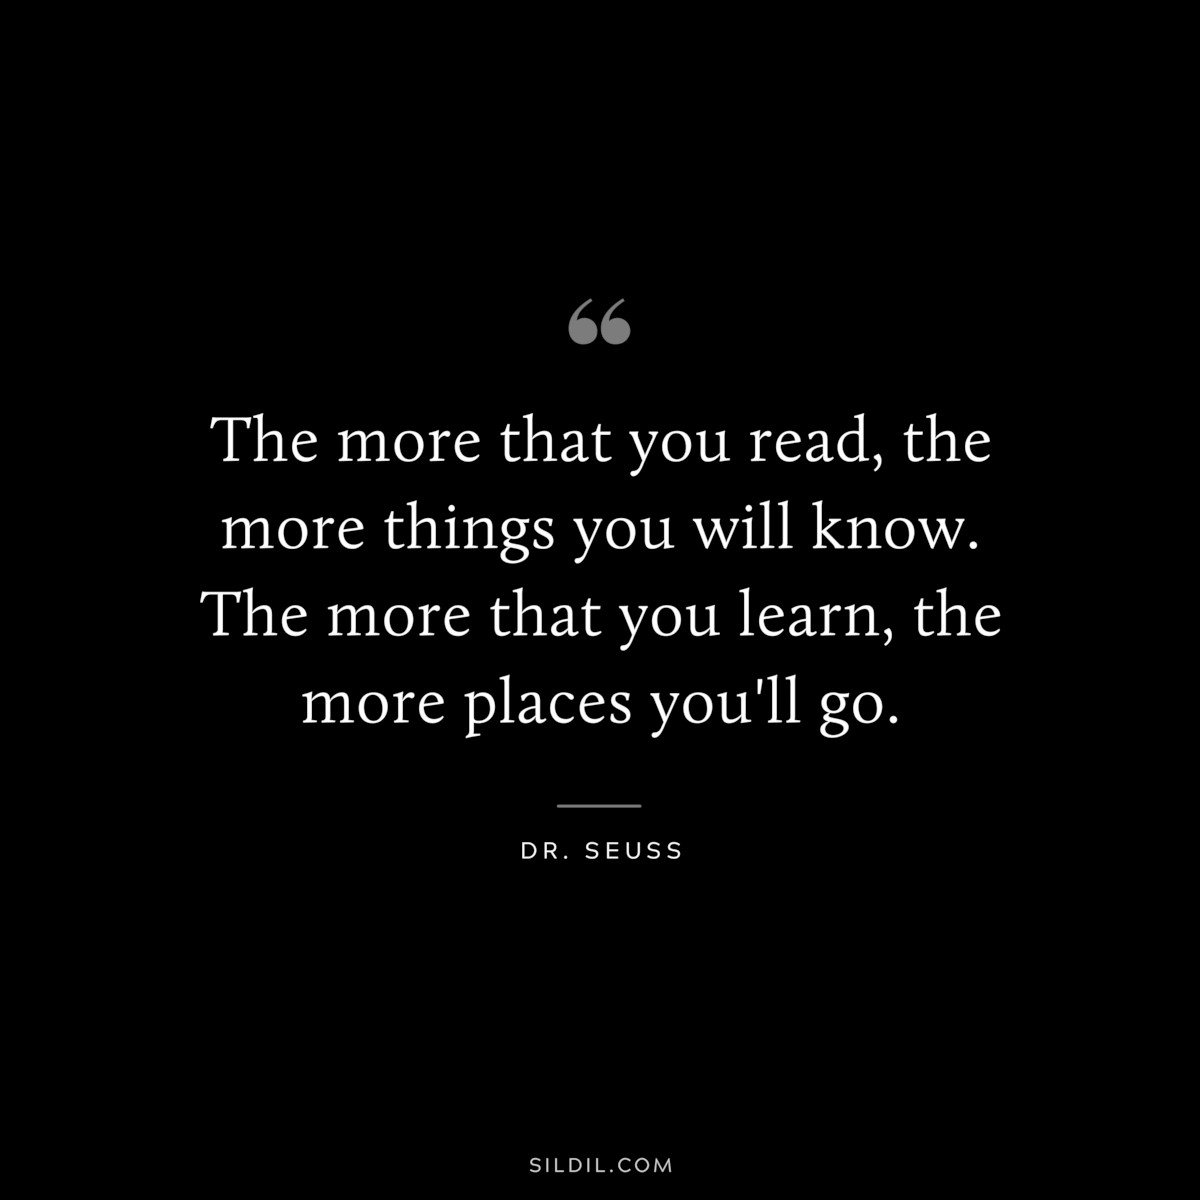 The more that you read, the more things you will know. The more that you learn, the more places you'll go. ― Dr. Seuss